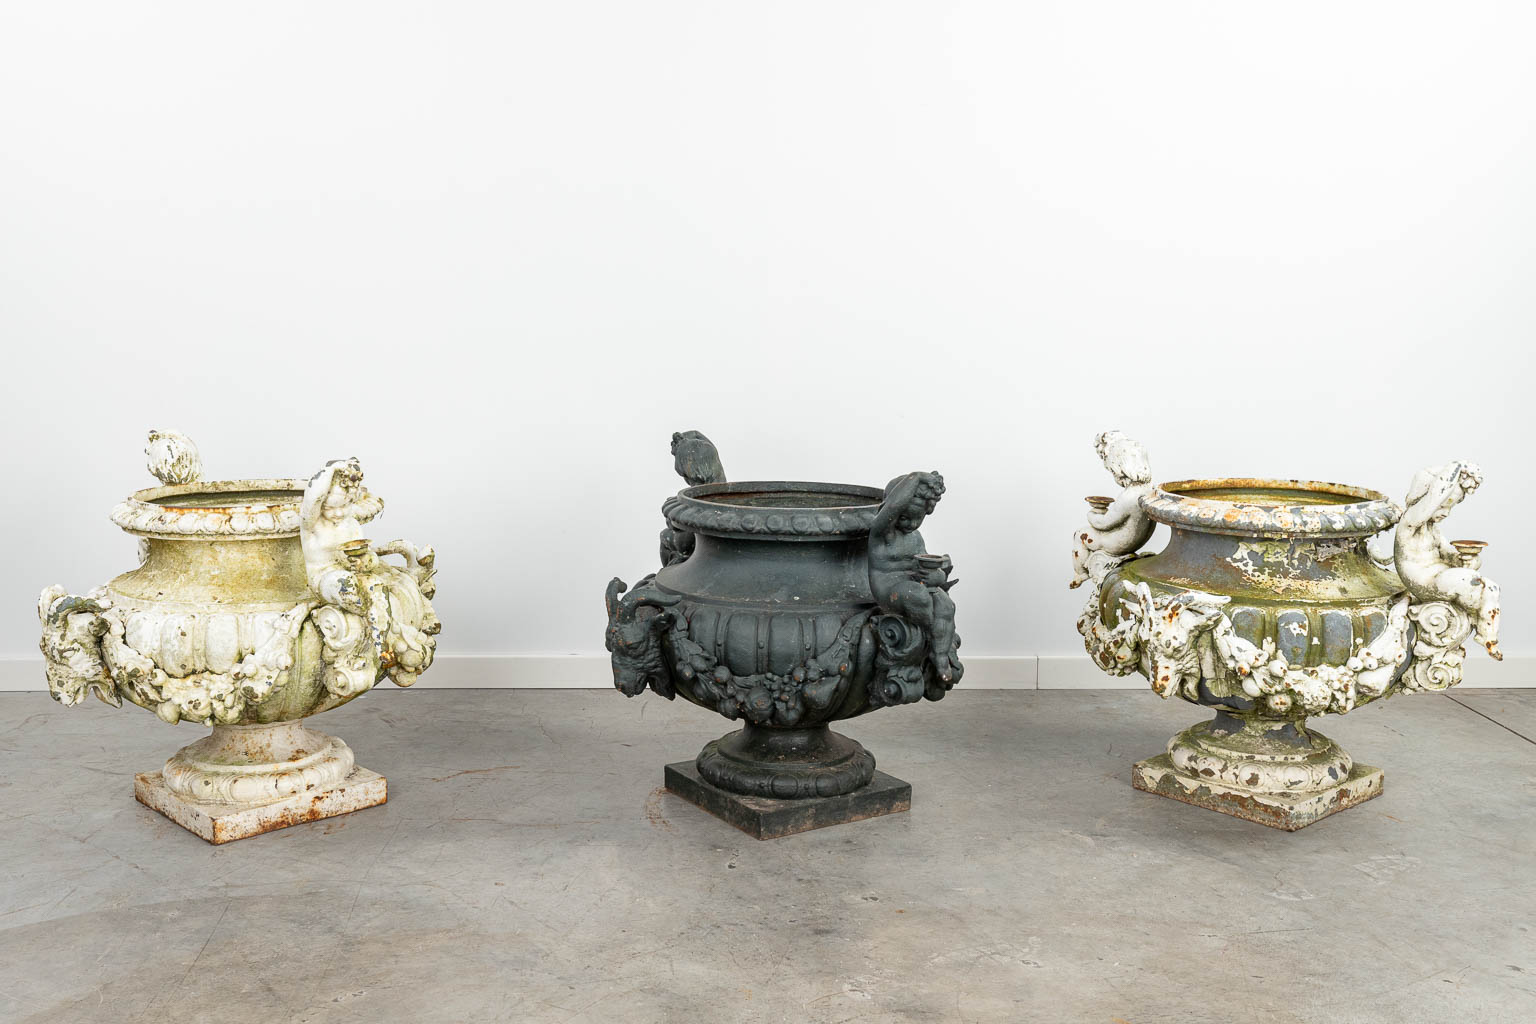 A set of 3 large garden vases made of cast iron, decorated with putti and ram's heads. (H:57cm) - Image 6 of 16